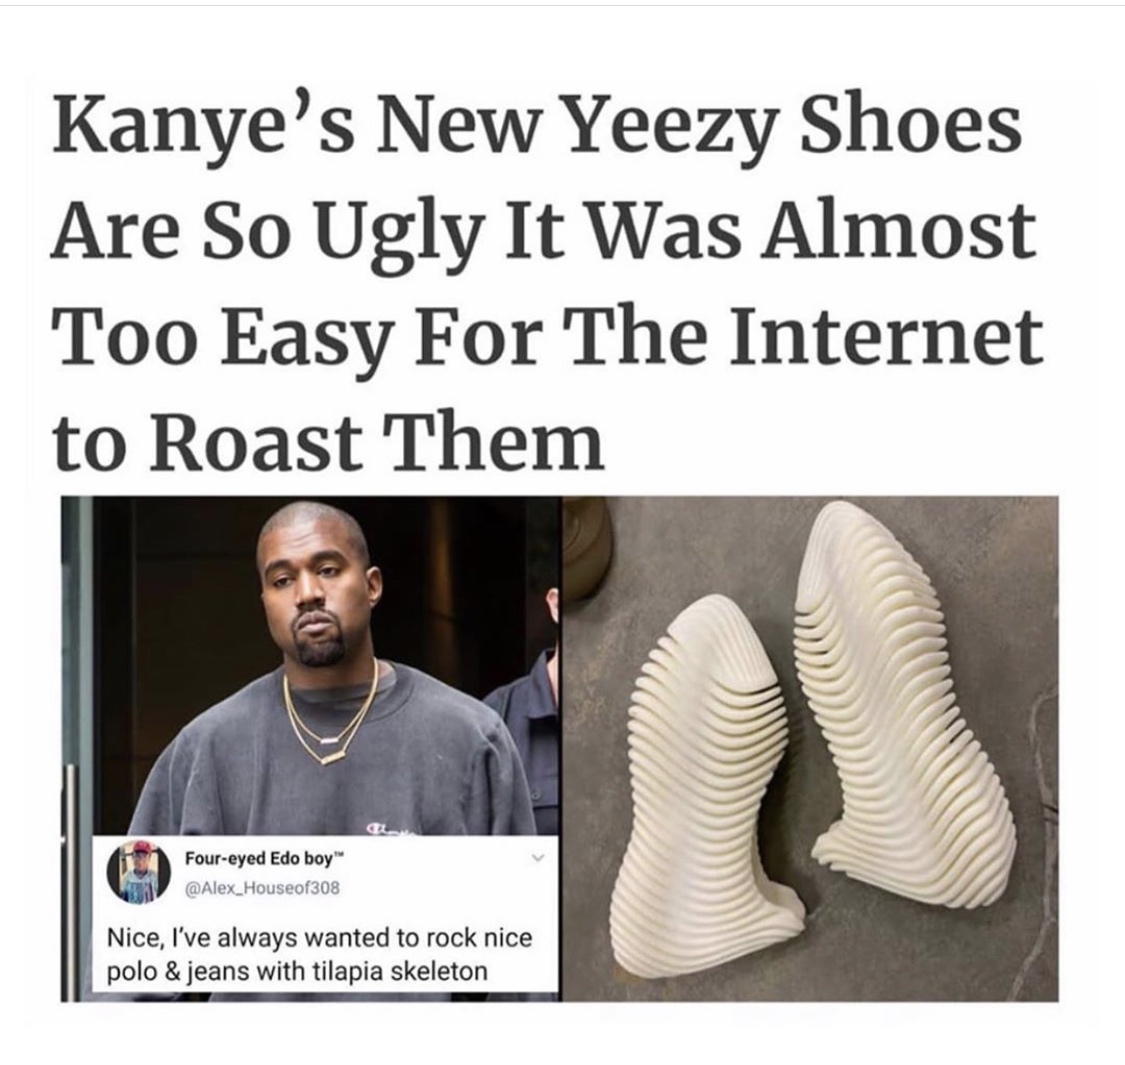 shoe - Kanye's New Yeezy Shoes Are So Ugly It Was Almost Too Easy For The Internet to Roast Them Foureyed Edo boy Nice, I've always wanted to rock nice polo & jeans with tilapia skeleton